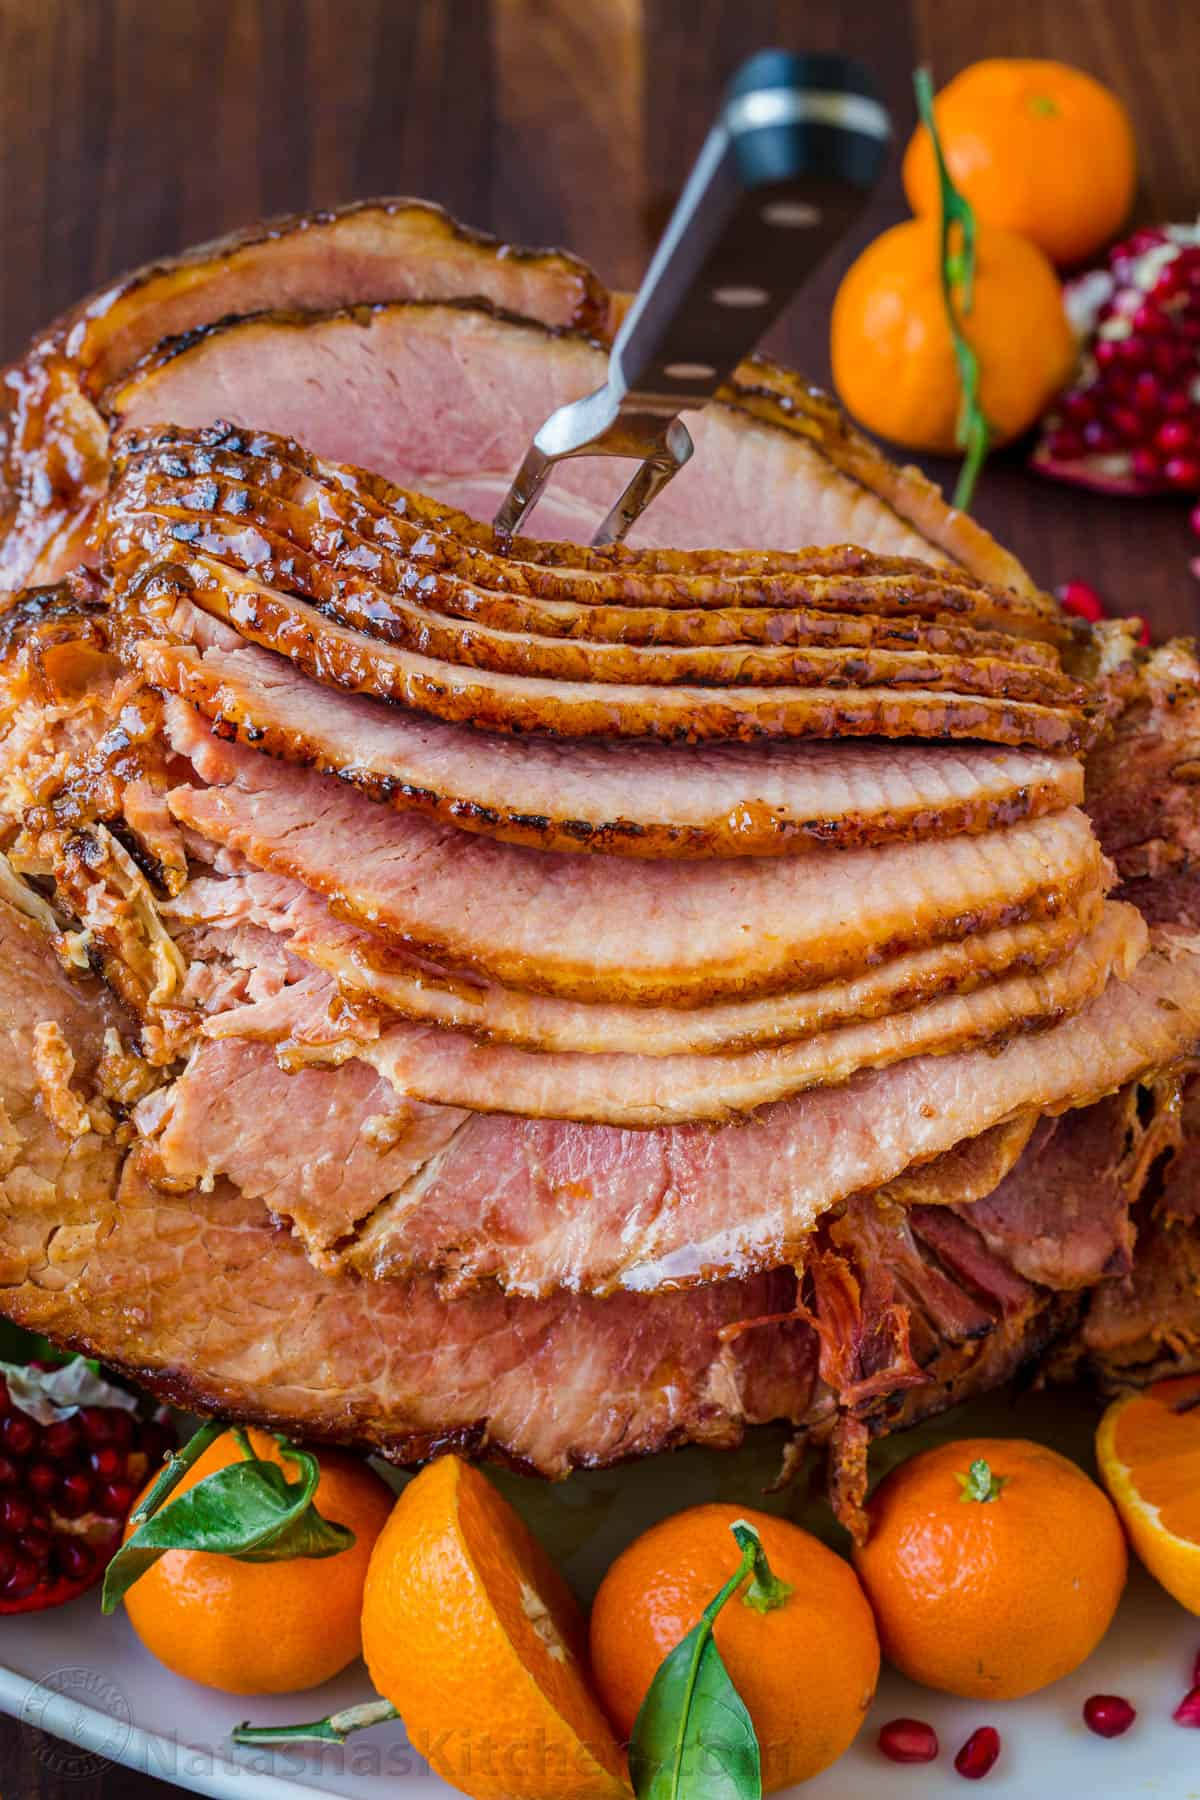 Baked Ham With Oranges Wallpaper